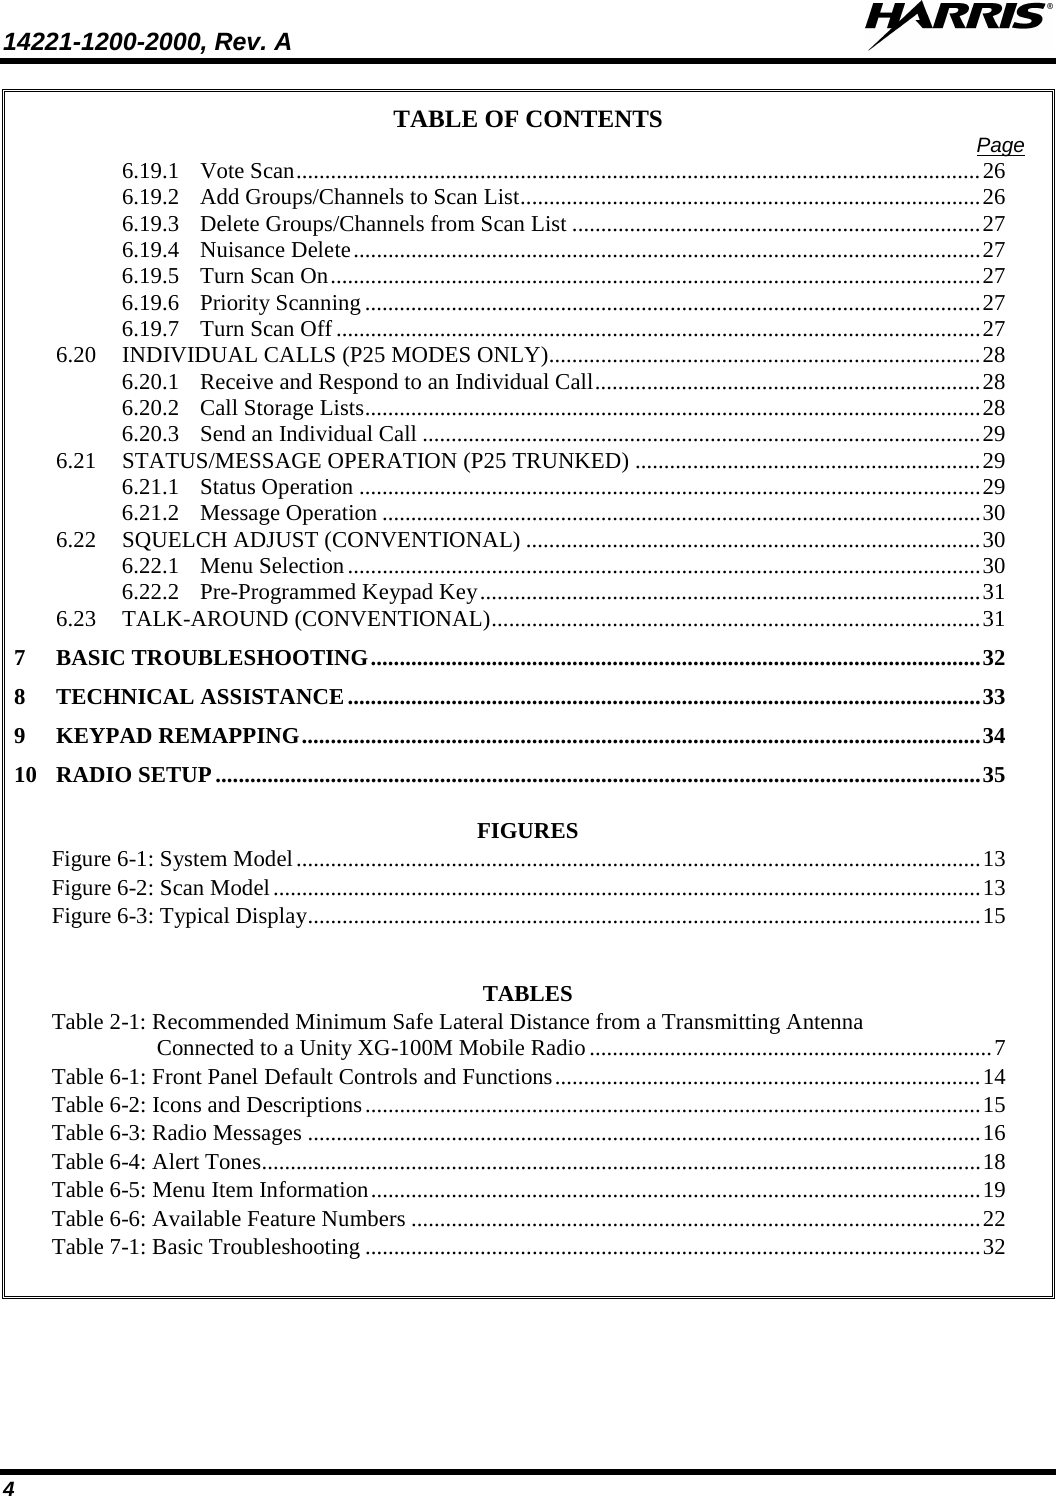 14221-1200-2000, Rev. A  4 TABLE OF CONTENTS Page 6.19.1 Vote Scan ....................................................................................................................... 26 6.19.2 Add Groups/Channels to Scan List ................................................................................ 26 6.19.3 Delete Groups/Channels from Scan List ....................................................................... 27 6.19.4 Nuisance Delete ............................................................................................................. 27 6.19.5 Turn Scan On ................................................................................................................. 27 6.19.6 Priority Scanning ........................................................................................................... 27 6.19.7 Turn Scan Off ................................................................................................................ 27 6.20 INDIVIDUAL CALLS (P25 MODES ONLY) ........................................................................... 28 6.20.1 Receive and Respond to an Individual Call ................................................................... 28 6.20.2 Call Storage Lists ........................................................................................................... 28 6.20.3 Send an Individual Call ................................................................................................. 29 6.21 STATUS/MESSAGE OPERATION (P25 TRUNKED) ............................................................ 29 6.21.1 Status Operation ............................................................................................................ 29 6.21.2 Message Operation ........................................................................................................ 30 6.22 SQUELCH ADJUST (CONVENTIONAL) ............................................................................... 30 6.22.1 Menu Selection .............................................................................................................. 30 6.22.2 Pre-Programmed Keypad Key ....................................................................................... 31 6.23 TALK-AROUND (CONVENTIONAL) ..................................................................................... 31 7 BASIC TROUBLESHOOTING .......................................................................................................... 32 8 TECHNICAL ASSISTANCE .............................................................................................................. 33 9 KEYPAD REMAPPING ...................................................................................................................... 34 10 RADIO SETUP ..................................................................................................................................... 35  FIGURES Figure 6-1: System Model ....................................................................................................................... 13 Figure 6-2: Scan Model ........................................................................................................................... 13 Figure 6-3: Typical Display ..................................................................................................................... 15   TABLES Table 2-1: Recommended Minimum Safe Lateral Distance from a Transmitting Antenna Connected to a Unity XG-100M Mobile Radio ...................................................................... 7 Table 6-1: Front Panel Default Controls and Functions .......................................................................... 14 Table 6-2: Icons and Descriptions ........................................................................................................... 15 Table 6-3: Radio Messages ..................................................................................................................... 16 Table 6-4: Alert Tones ............................................................................................................................. 18 Table 6-5: Menu Item Information .......................................................................................................... 19 Table 6-6: Available Feature Numbers ................................................................................................... 22 Table 7-1: Basic Troubleshooting ........................................................................................................... 32  